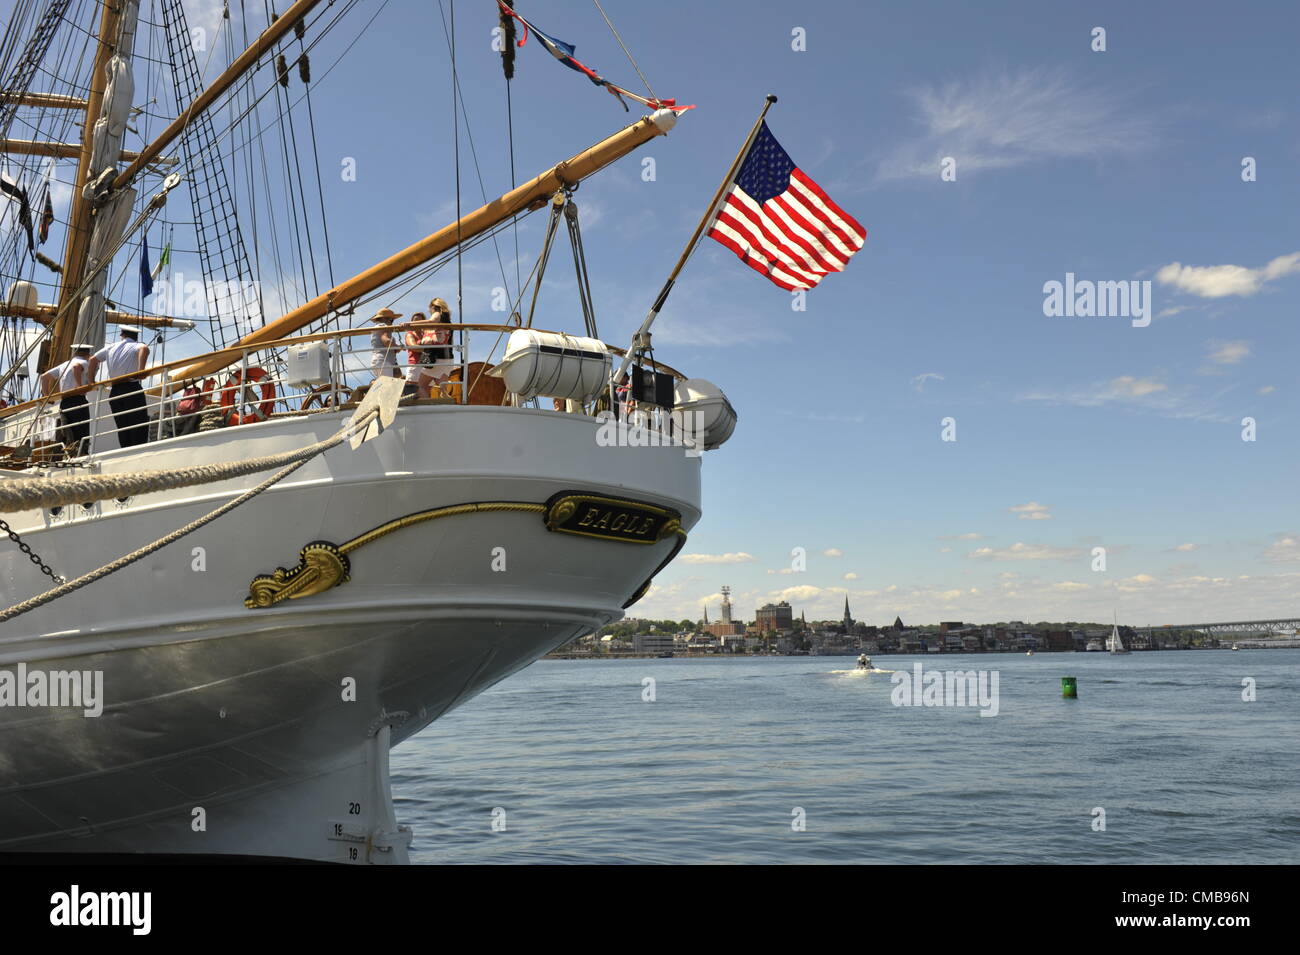 America's tall ship the barque Eagle, a US Coast Guard training vessel docked at Fort Trumbull, New London, Connecticut where it can often be visited in the summer, The US flag, the Stars and Stripes, flies from the stern. Copy space. Original Live News Caption:  New London, Connecticut, USA - July 9, 2012: The stern of the US Coast Guard training ship Eagle with the American flag flying, seen here moored at Fort Trumbull, on the last day of OpSail 2012 CT, celebrating the bicentennial of the War of 1812 and the penning of the Star Spangled Banner. Stock Photo